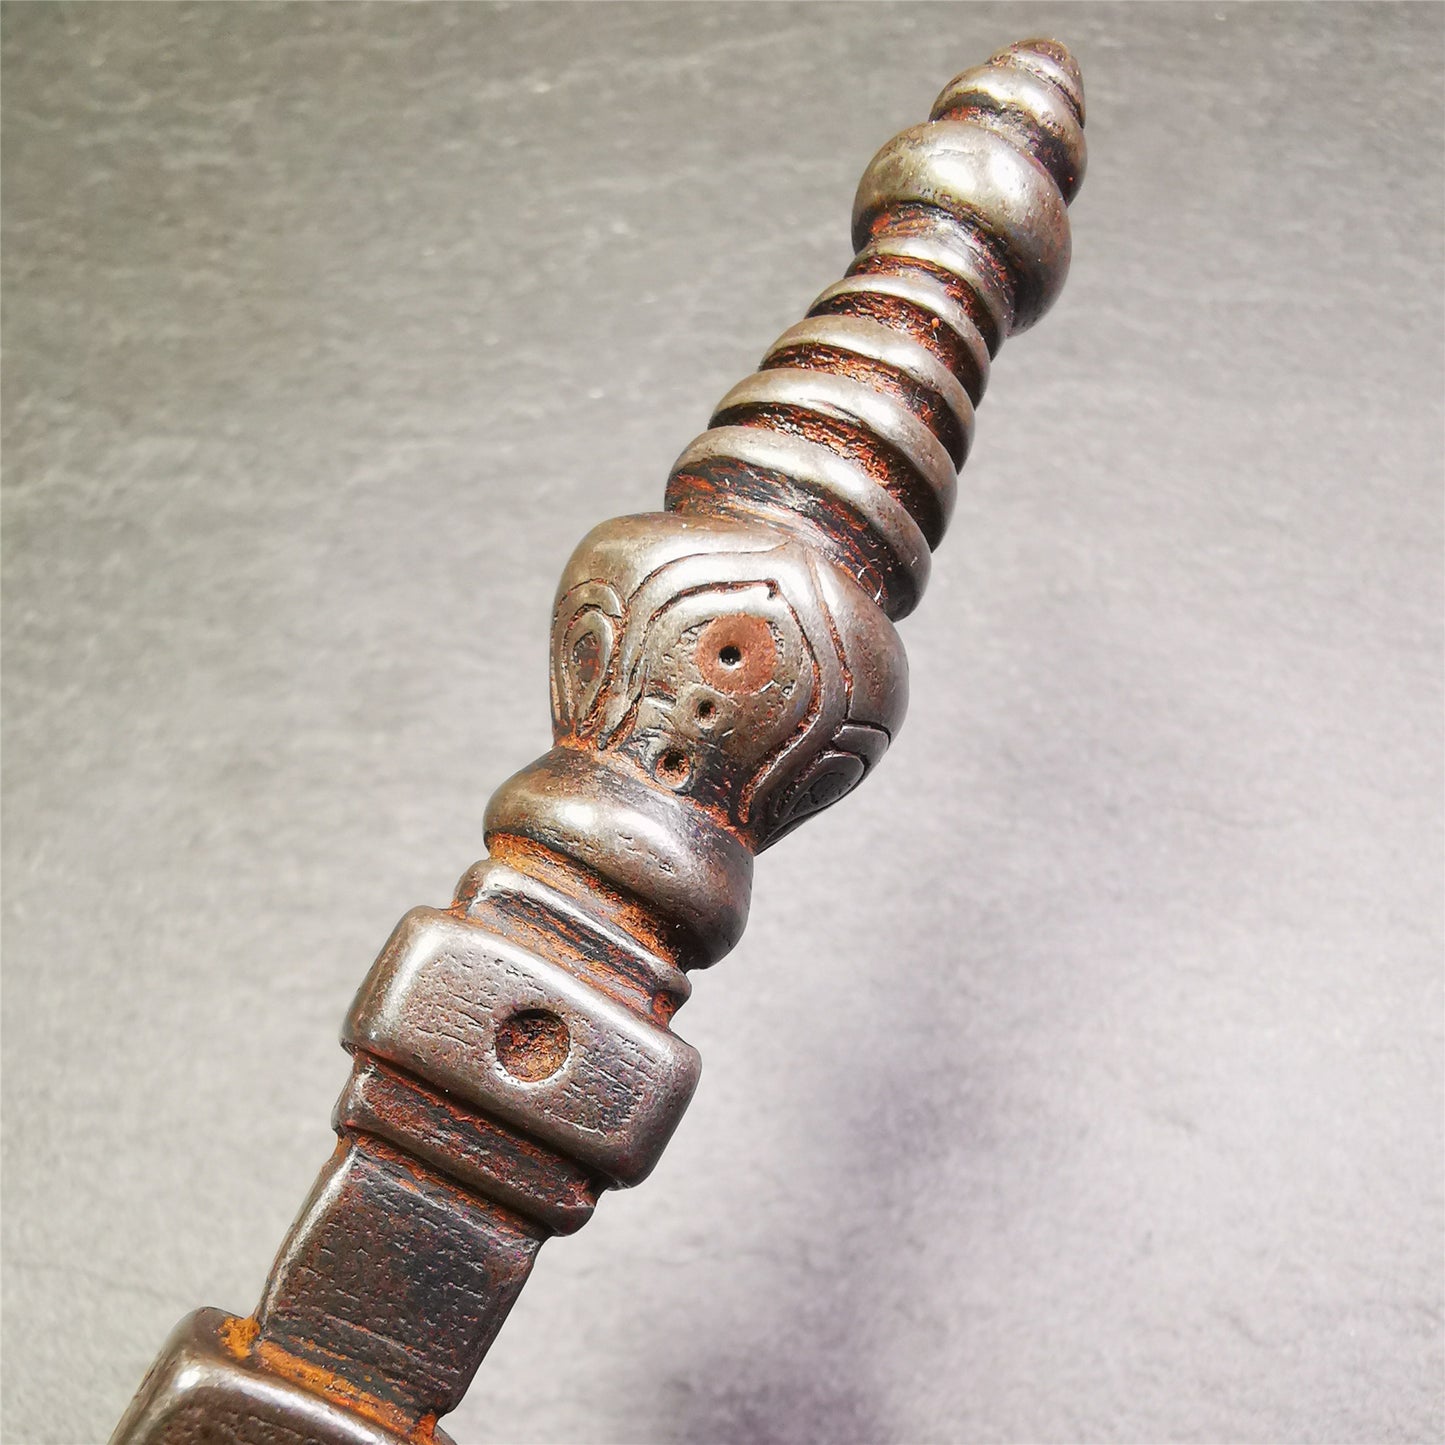 Gandhanra Tibetan Buddhist Ritual Implement - Kila -Dorje Phurba,Made of Cold Iron inlaid Copper,7.5".Its top is a stupa, in the middle is the skull Shmashana Adhipati, and at the bottom is a phurba,handmade by Tibetan craftsmen in 1990's.